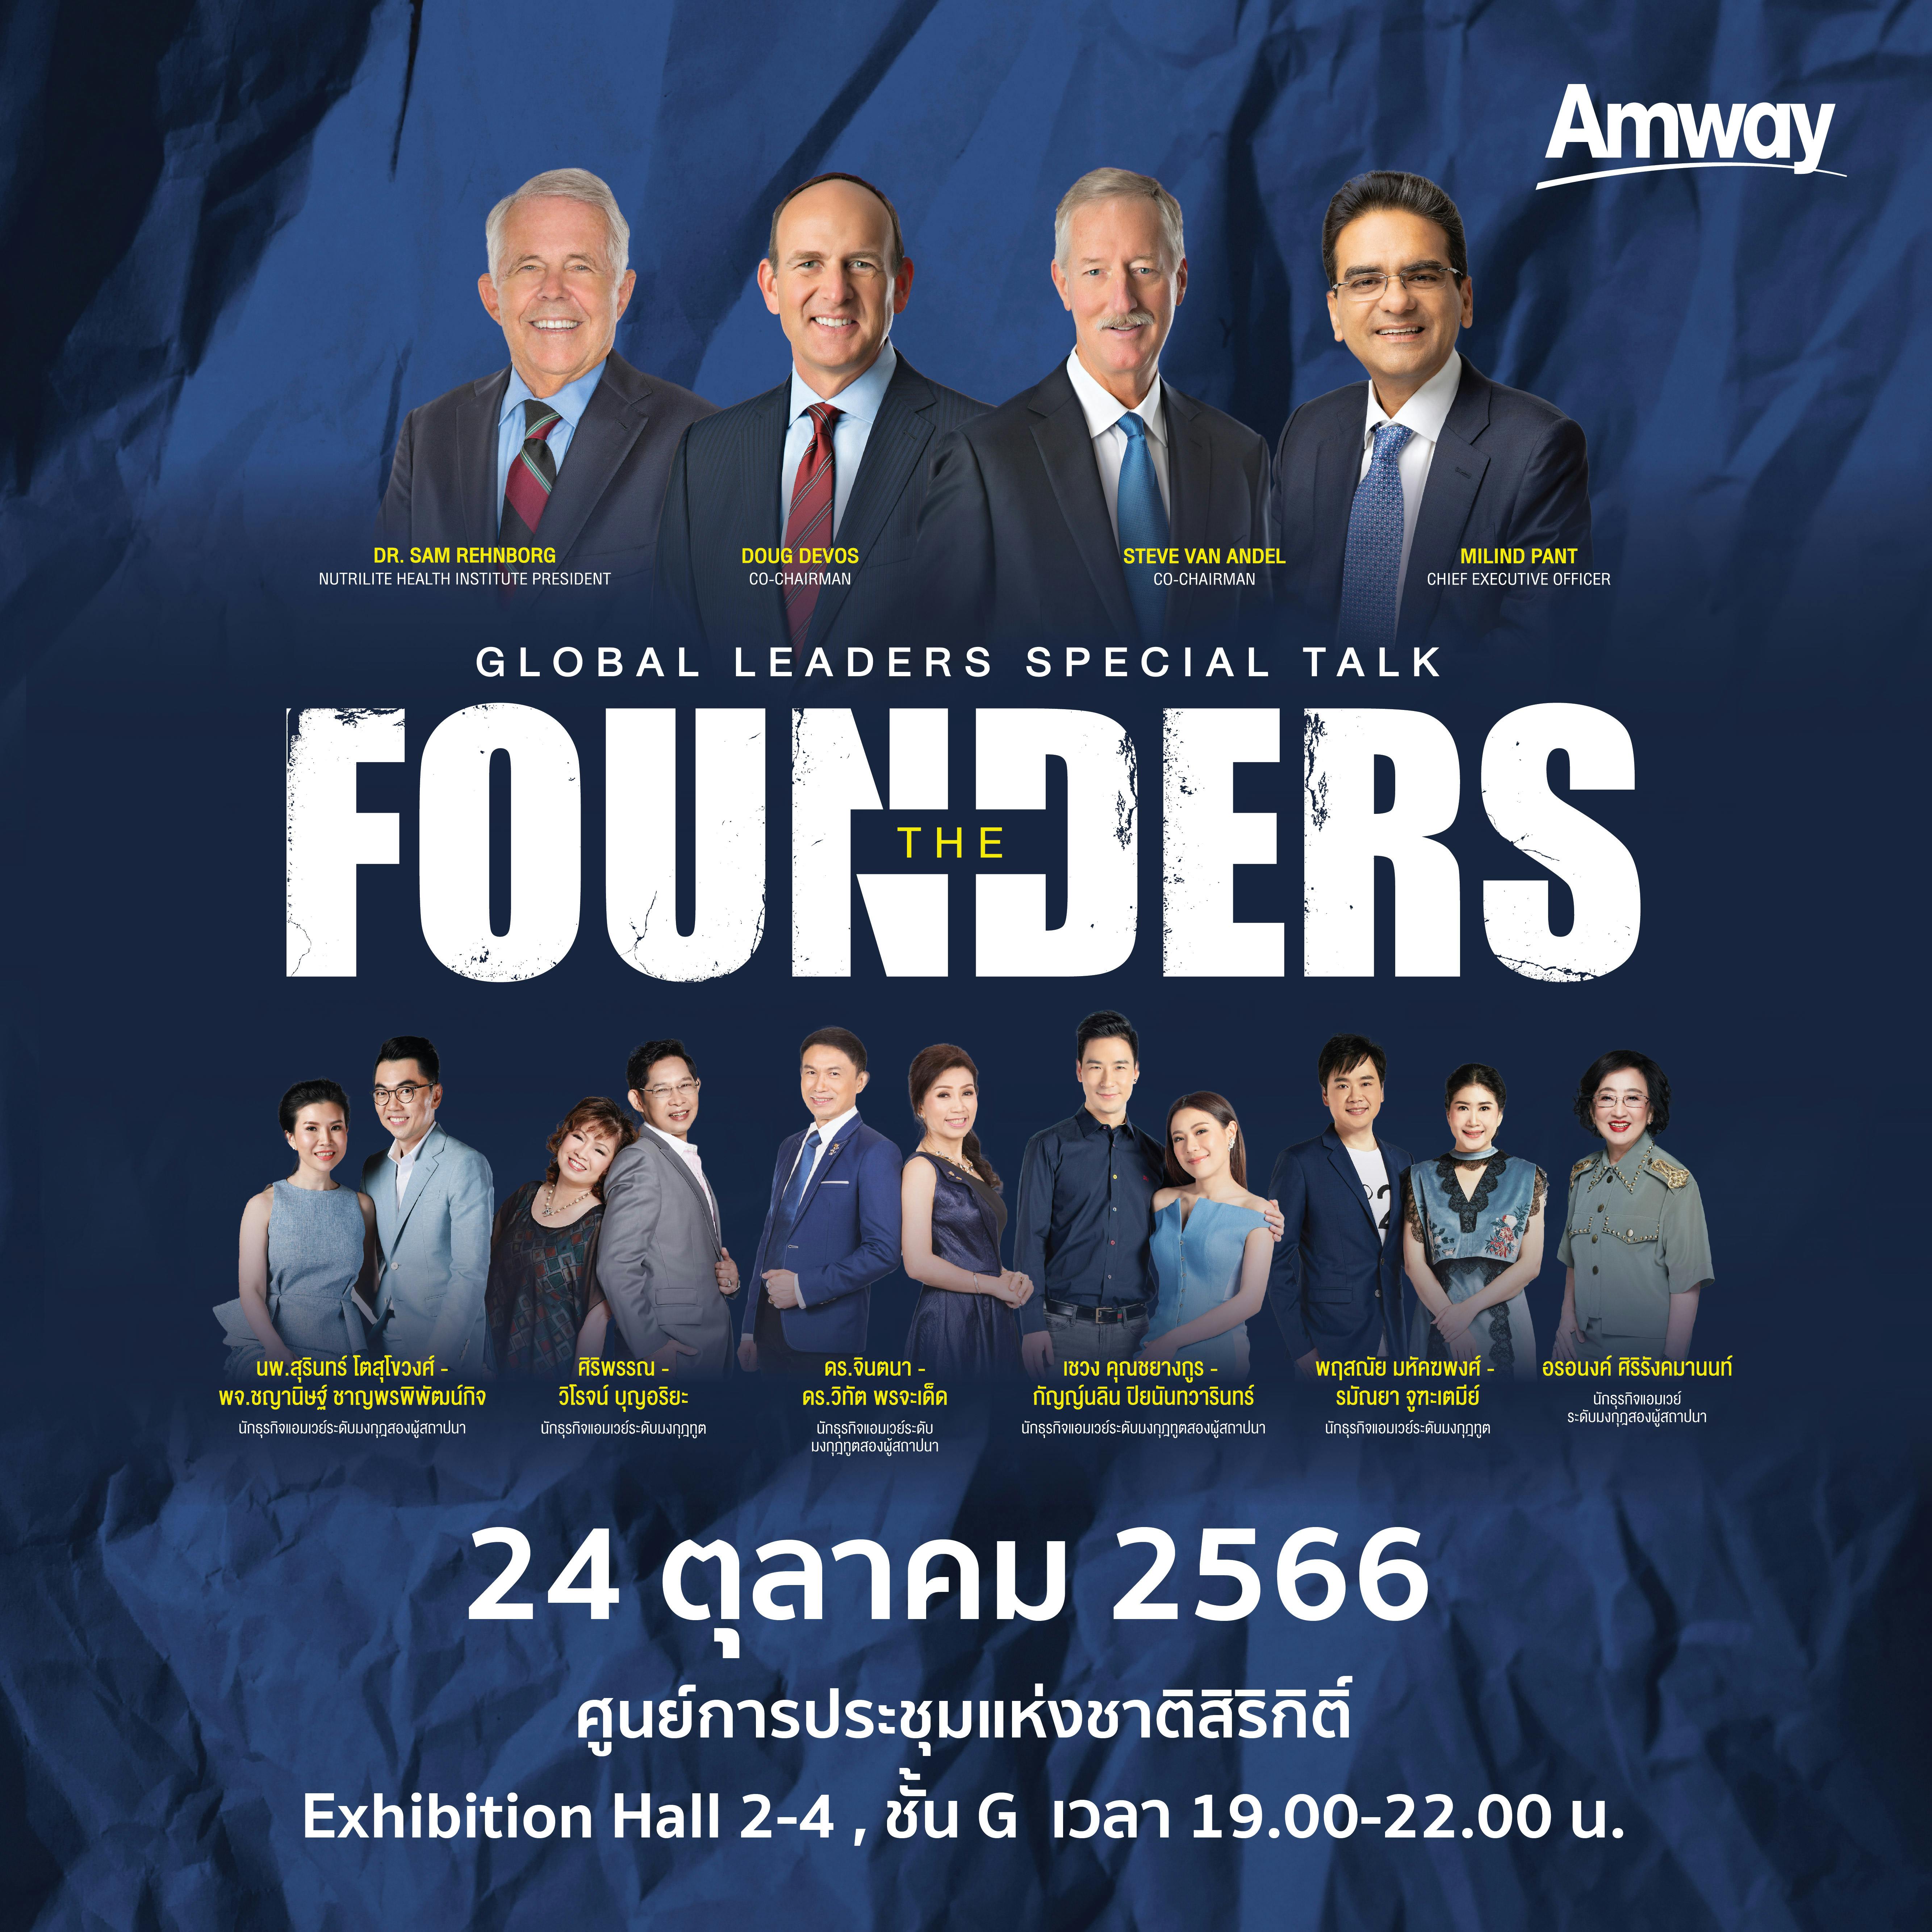 THE FOUNDERS